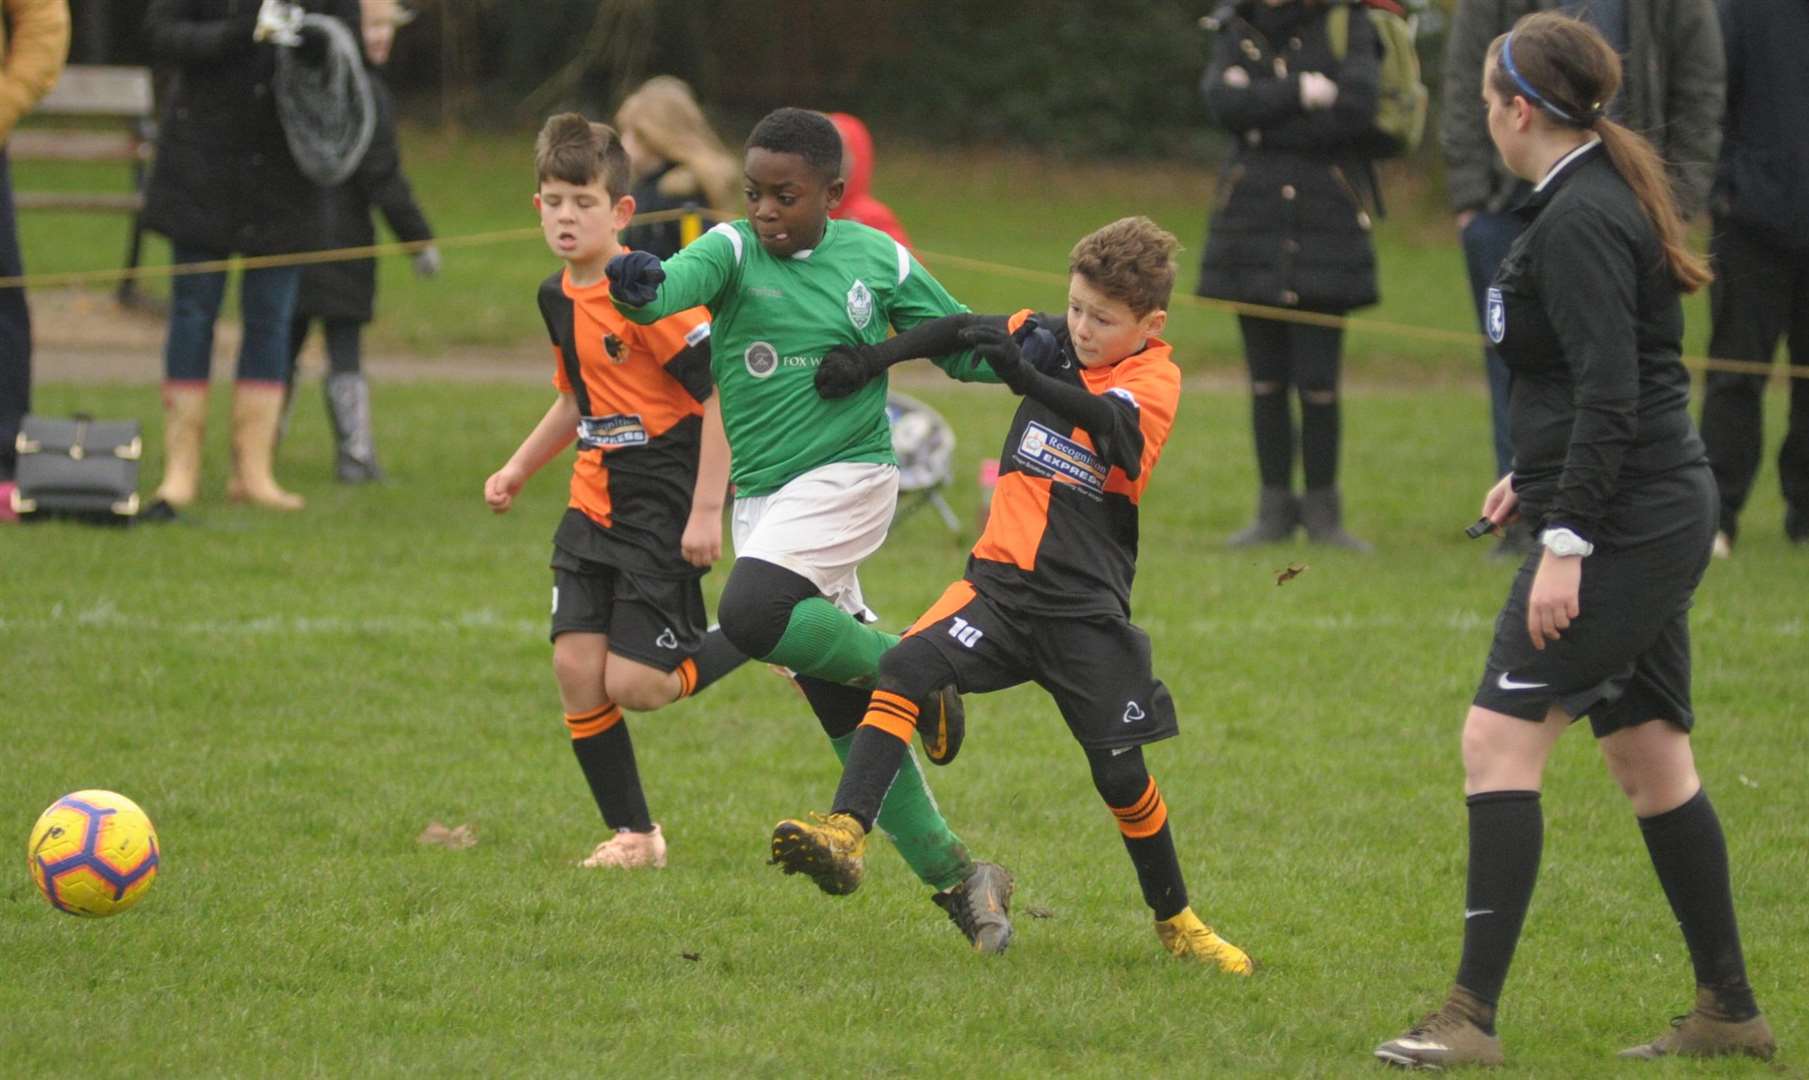 Pegasus 81 under-10s takes on Horsted Youth under-10s. Picture: Steve Crispe FM6473901